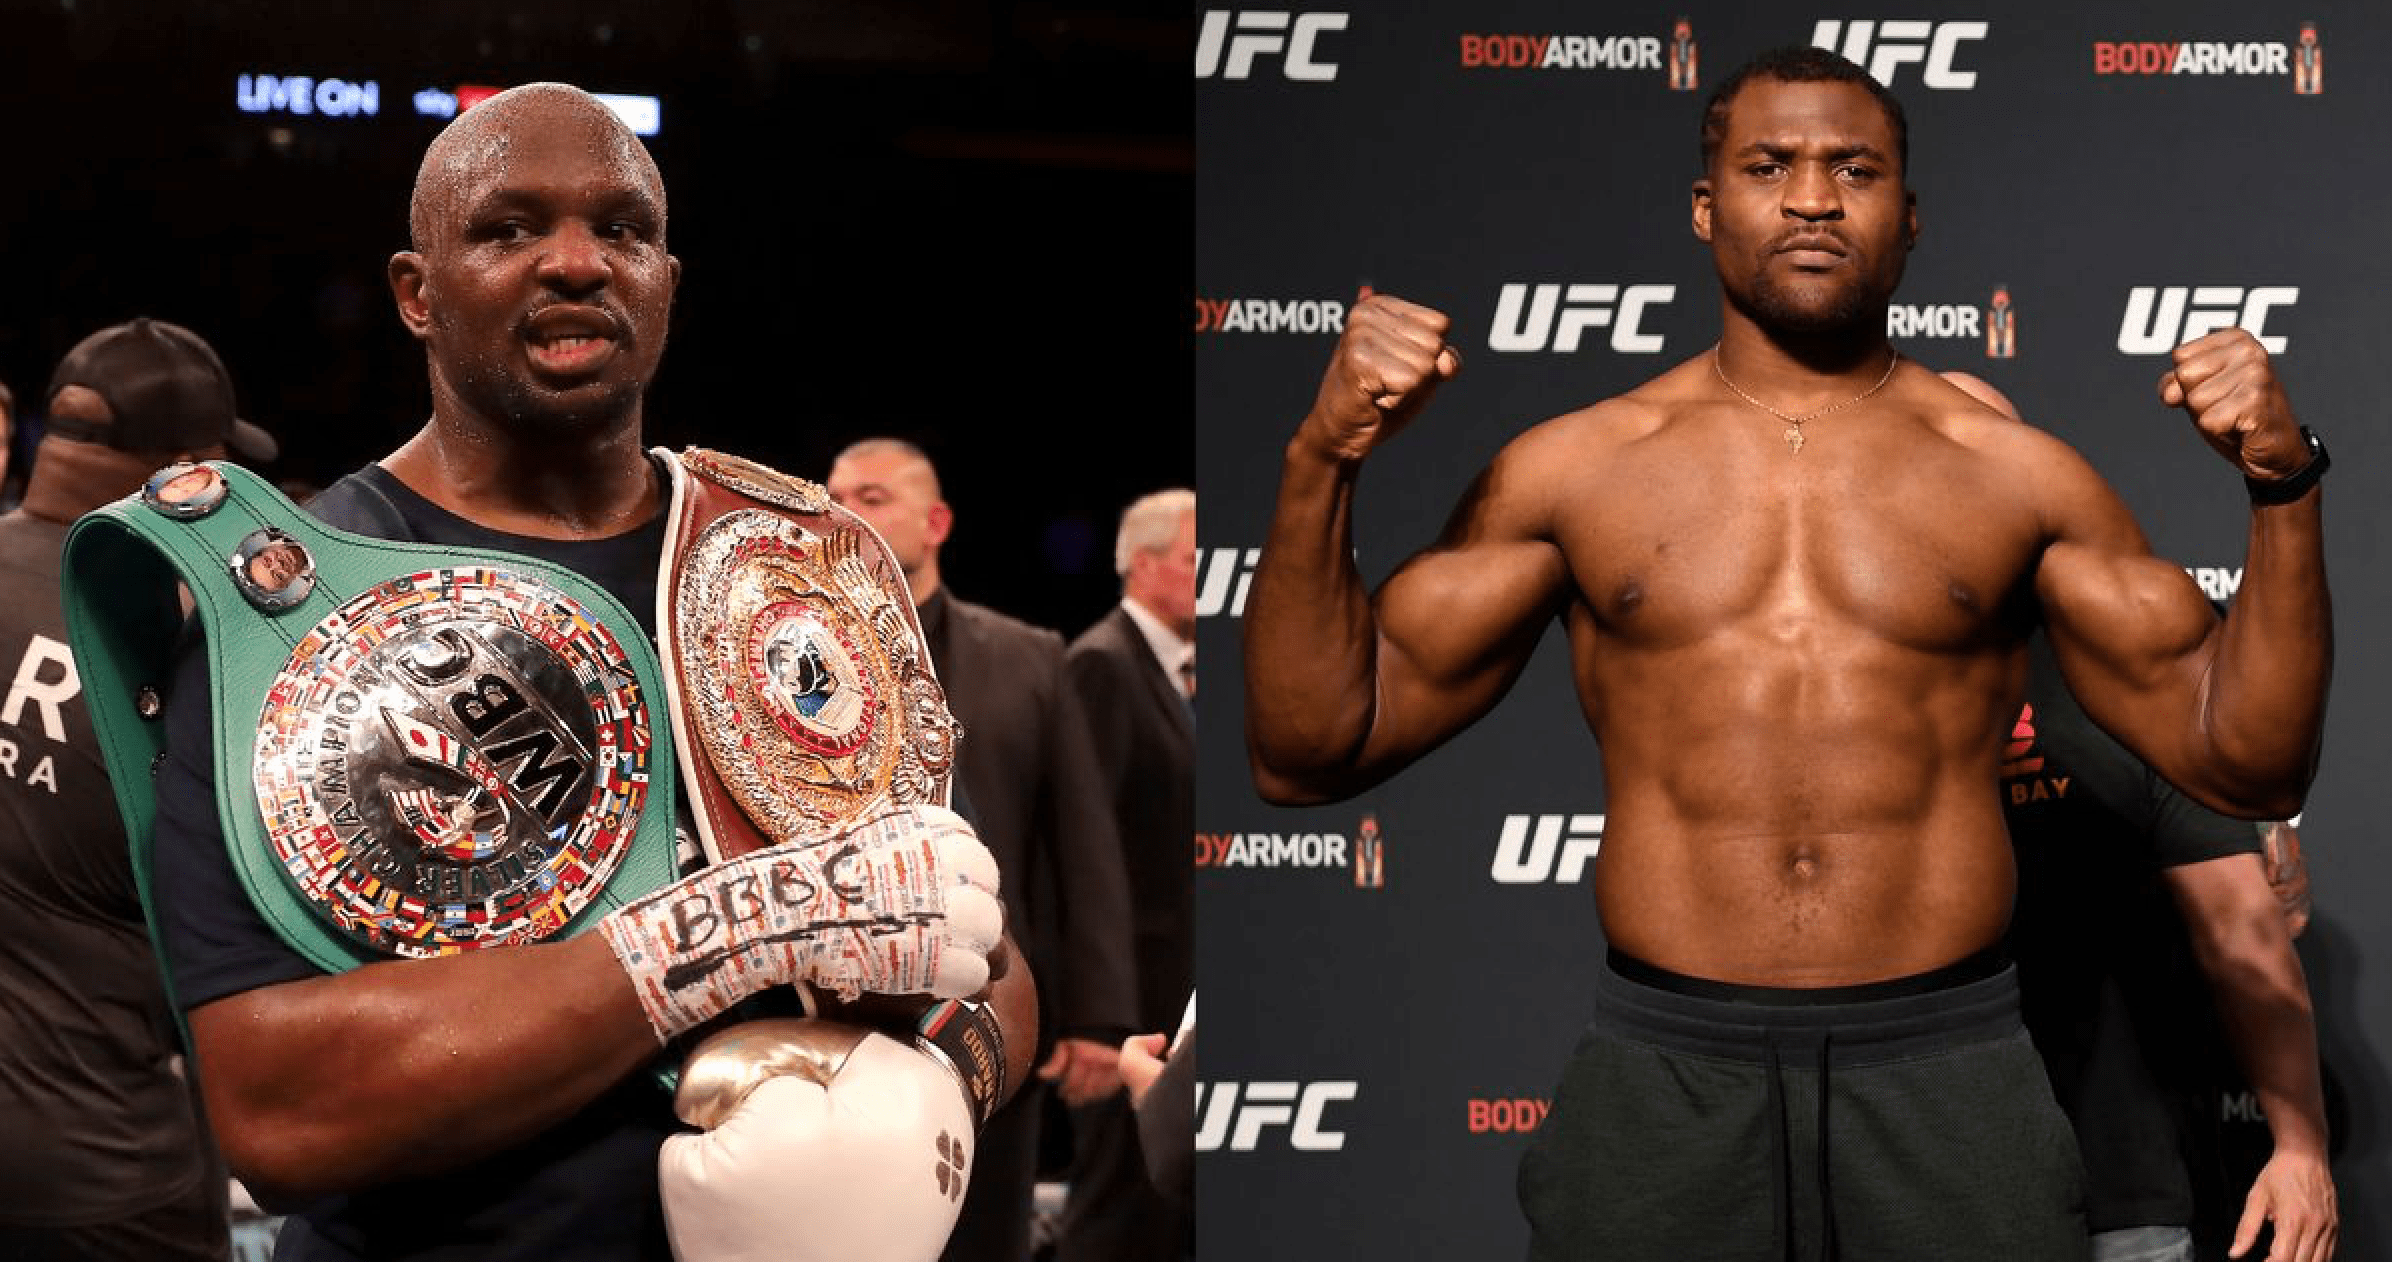 Dillian Whyte On Francis Ngannou: I’d Hurt Him And Knock Him Clean Out